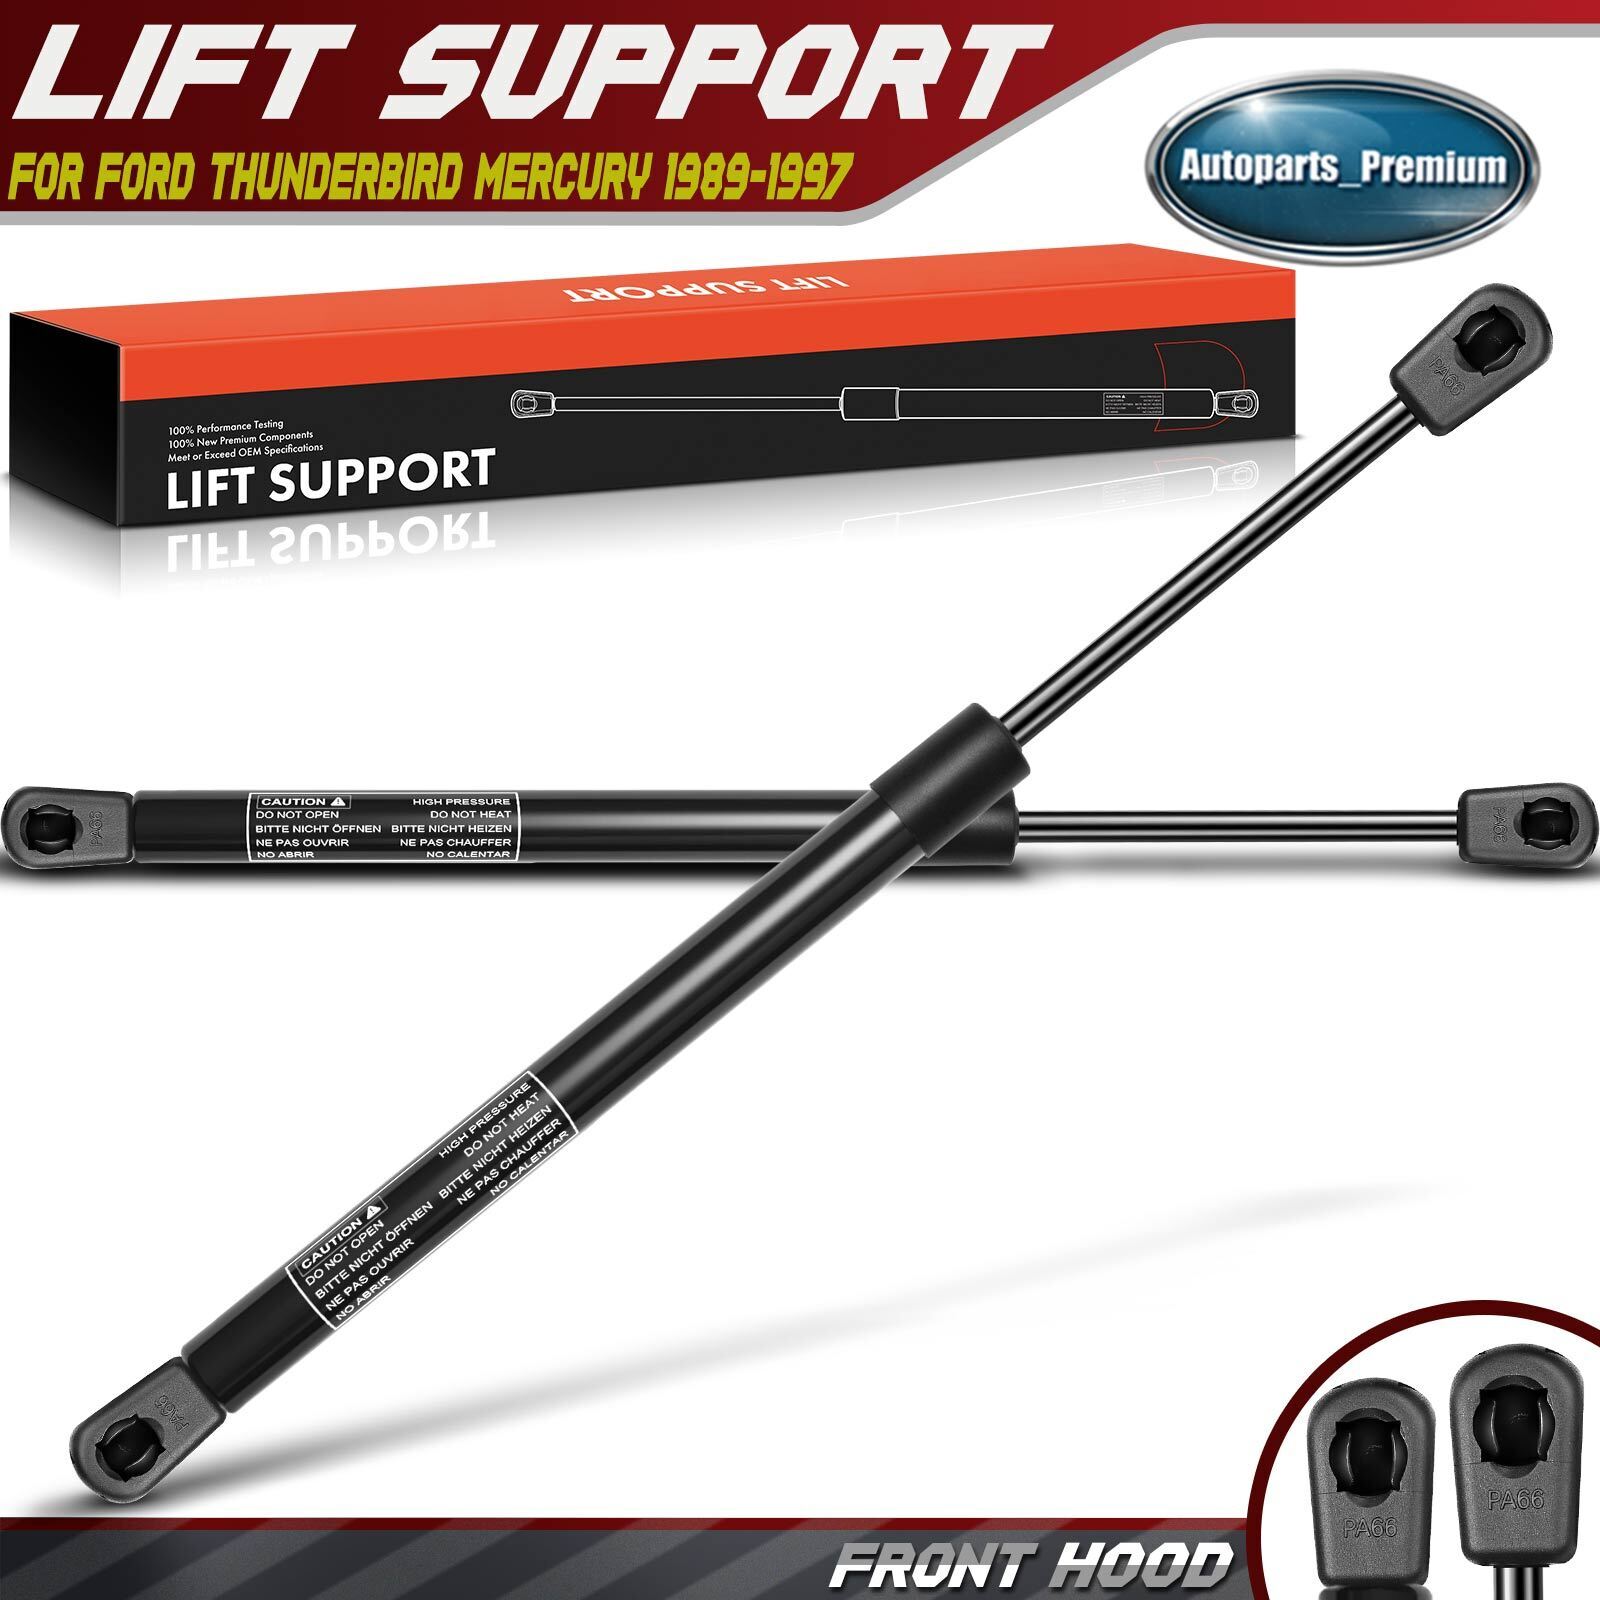 2x Front Hood Lift Support Shock Strut for Ford Thunderbird Mercury Cougar 89-97